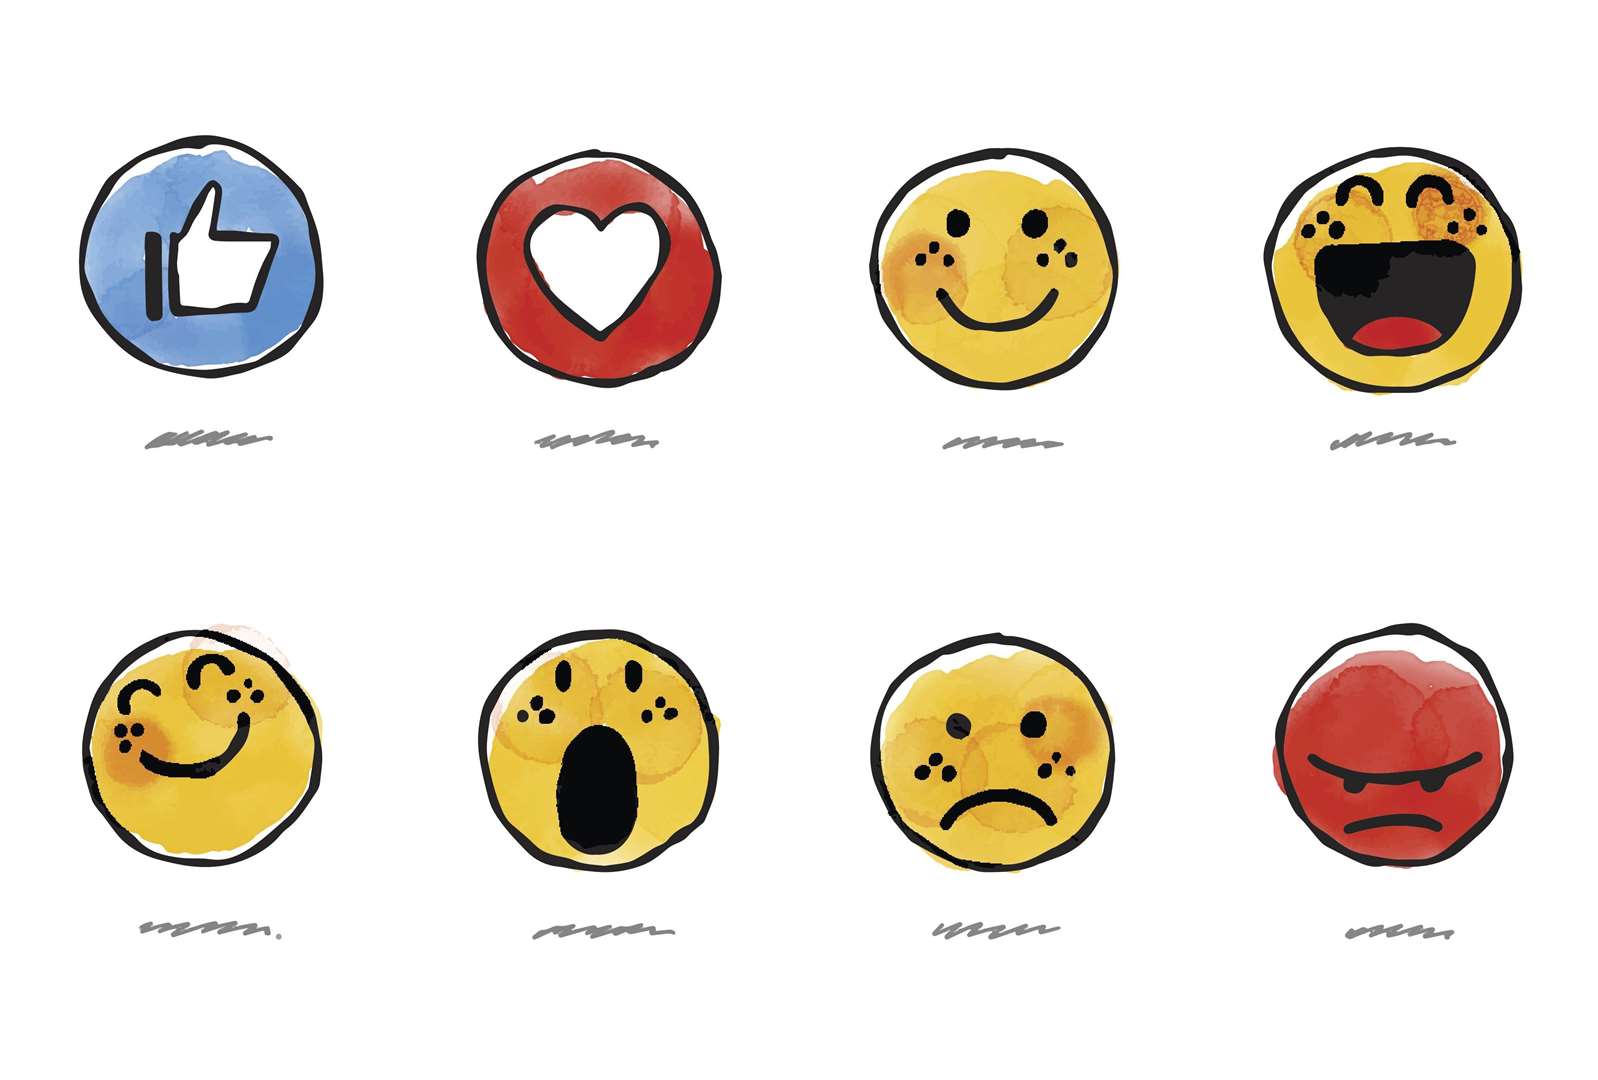 Children struggling to talk about how they are feeling may be able to describe their mood using emojis